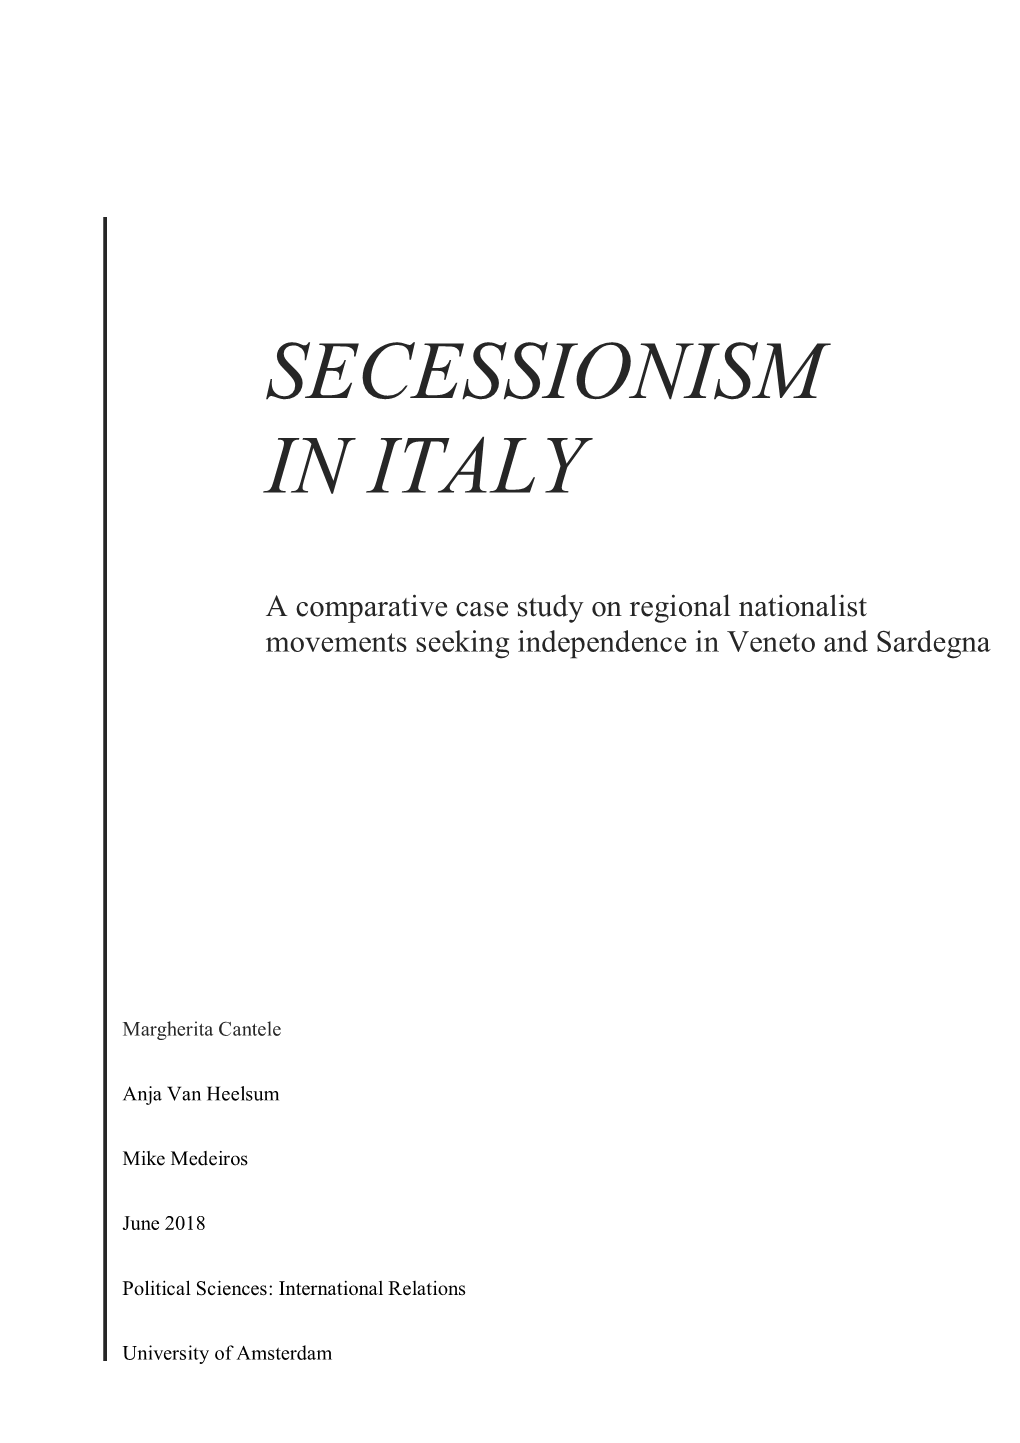 Secessionism in Italy